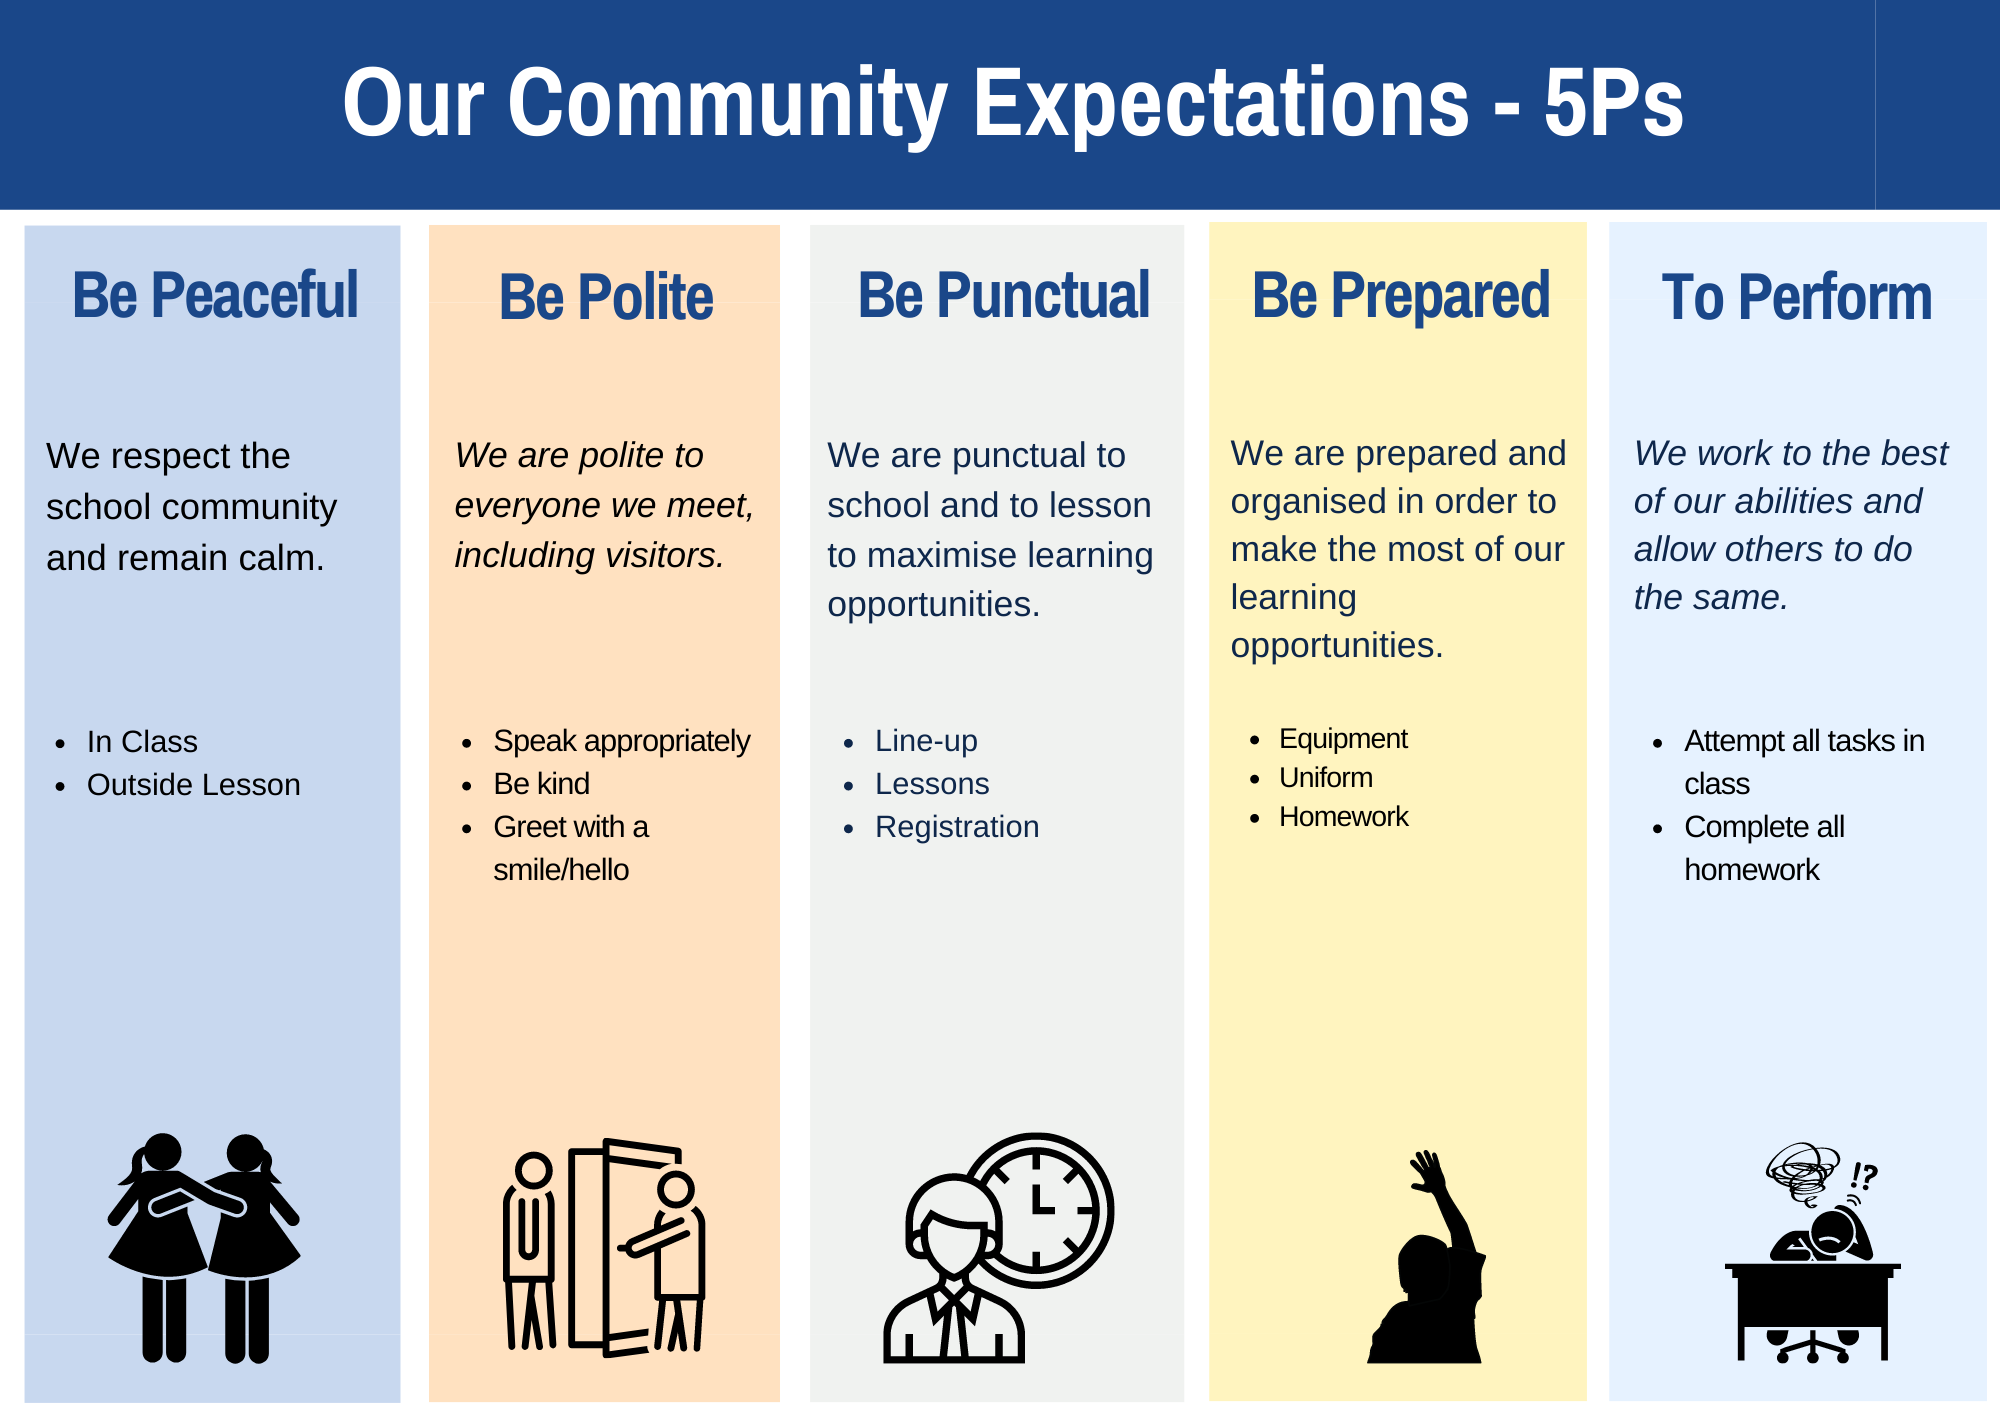 Our Community Expectations